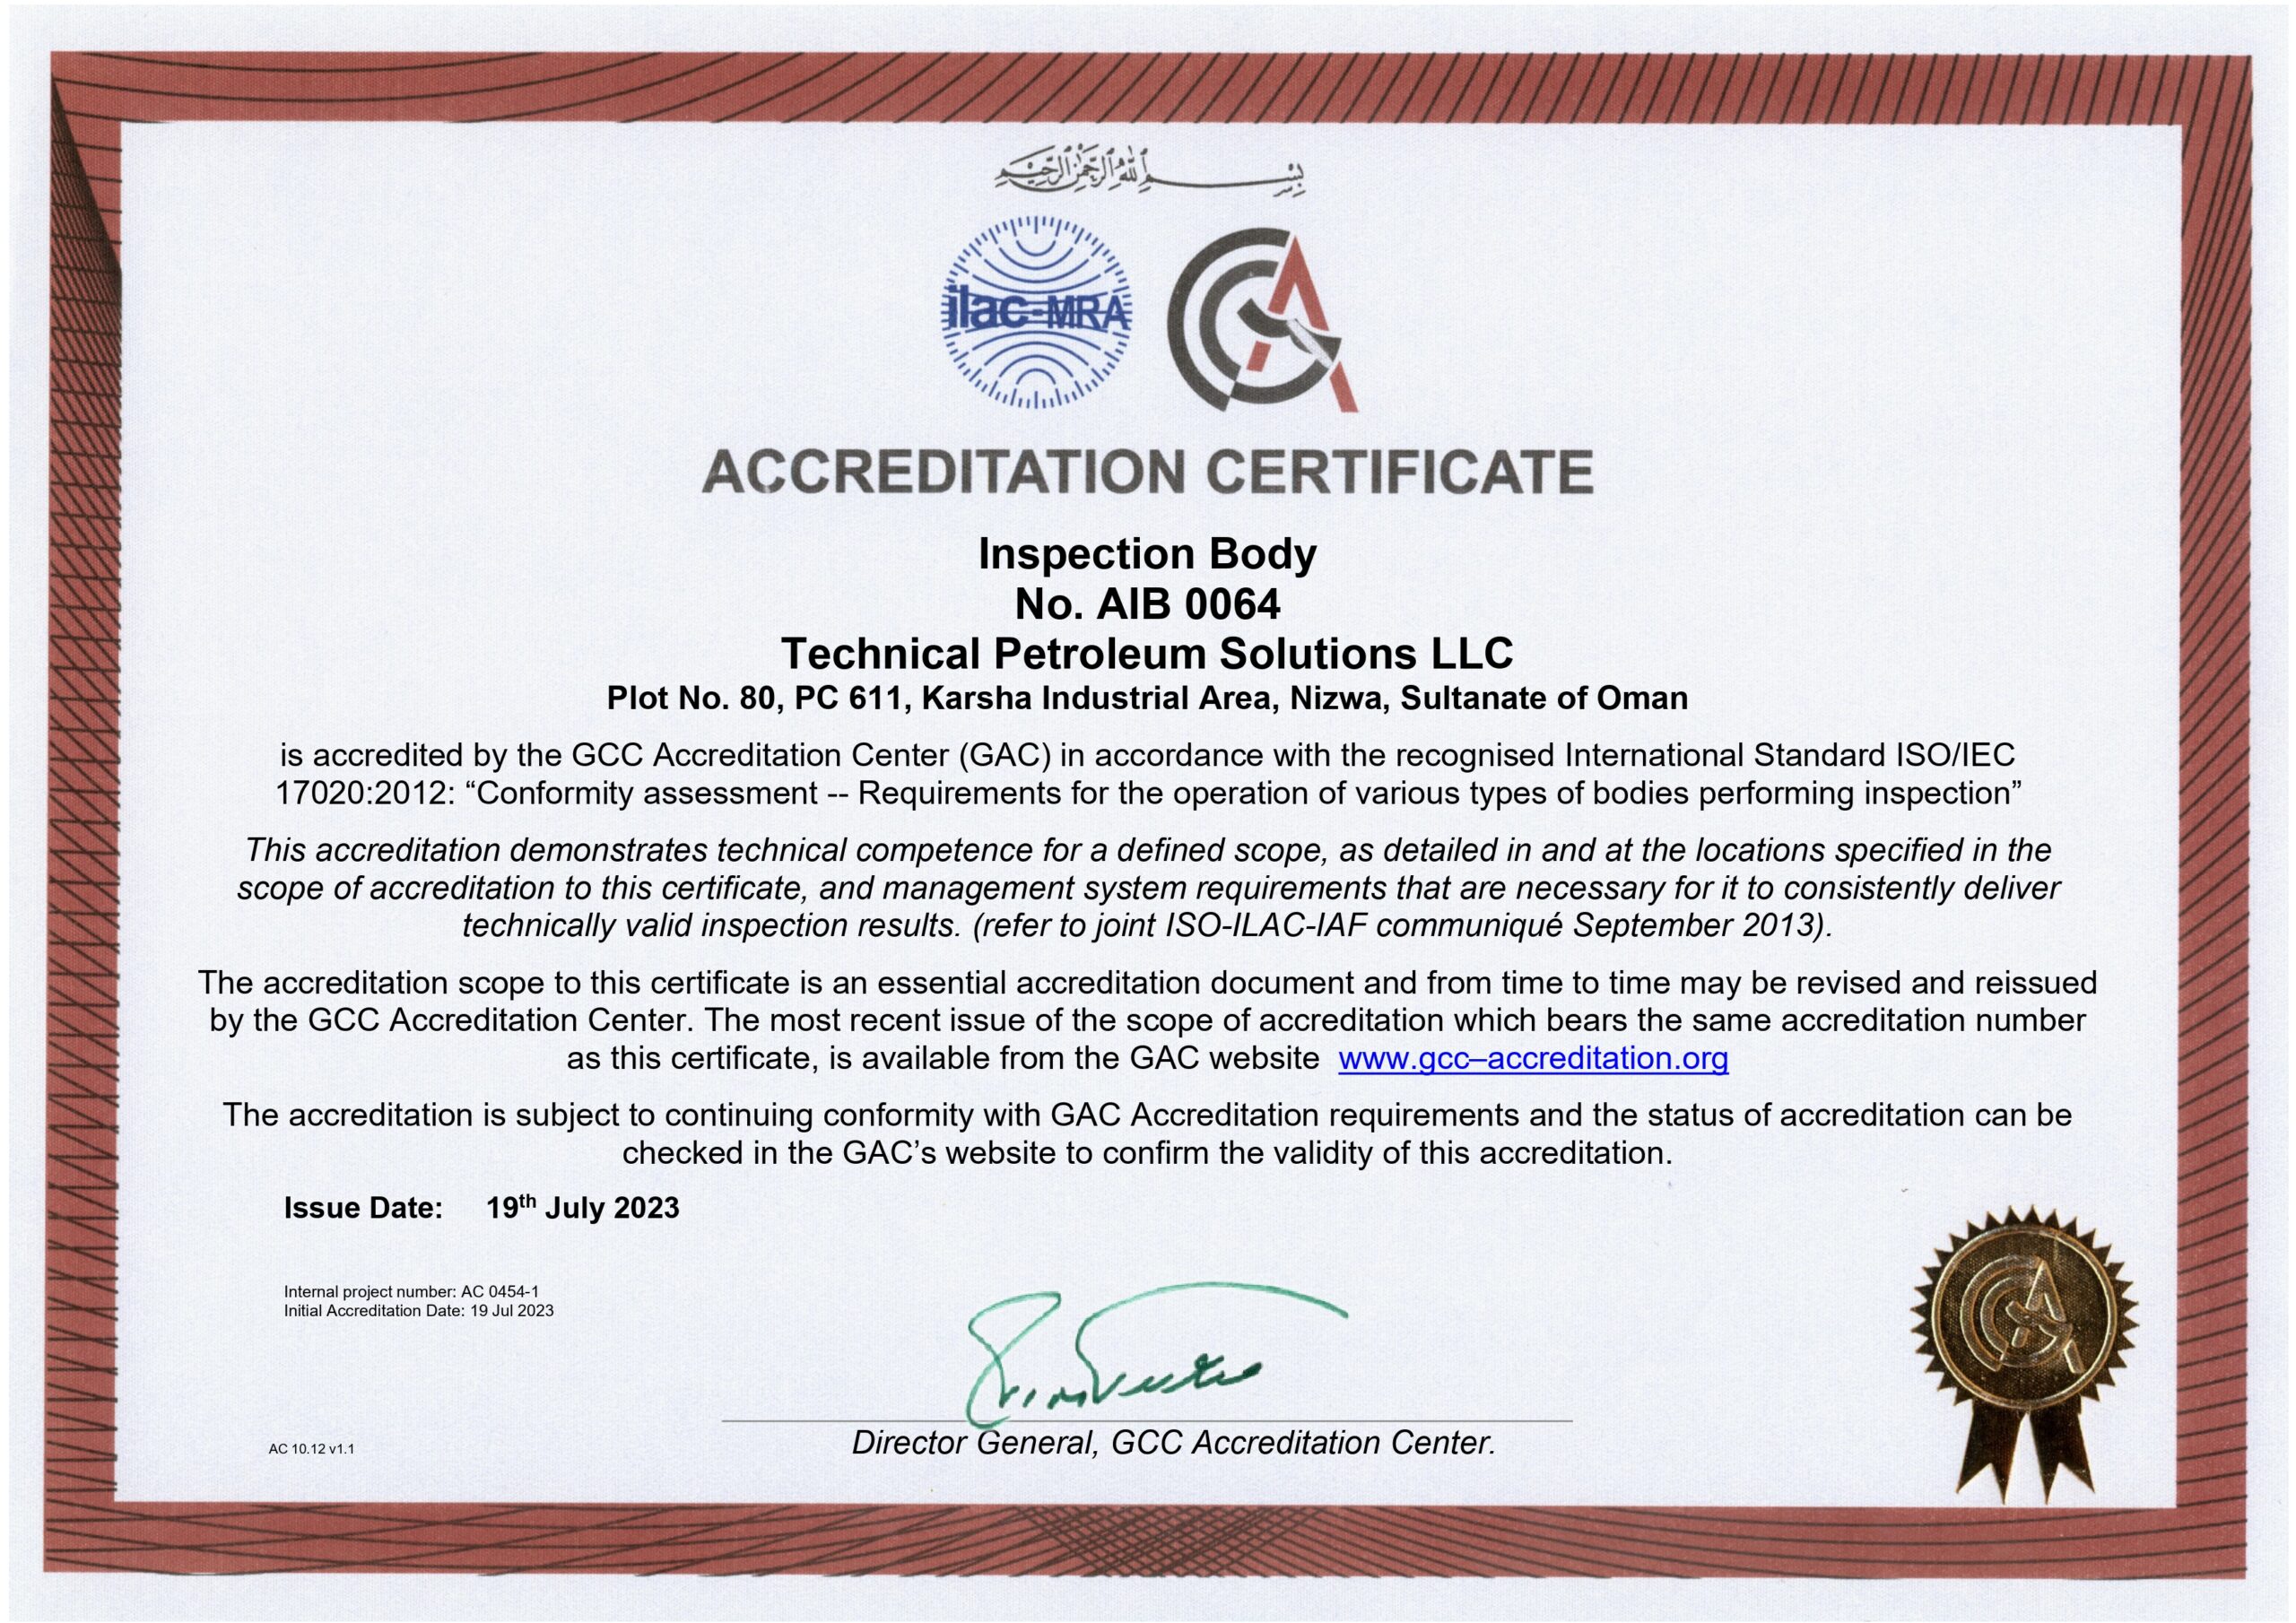 AC 10.12 Accreditation certificate AIB 0064 v1.1_page-0001